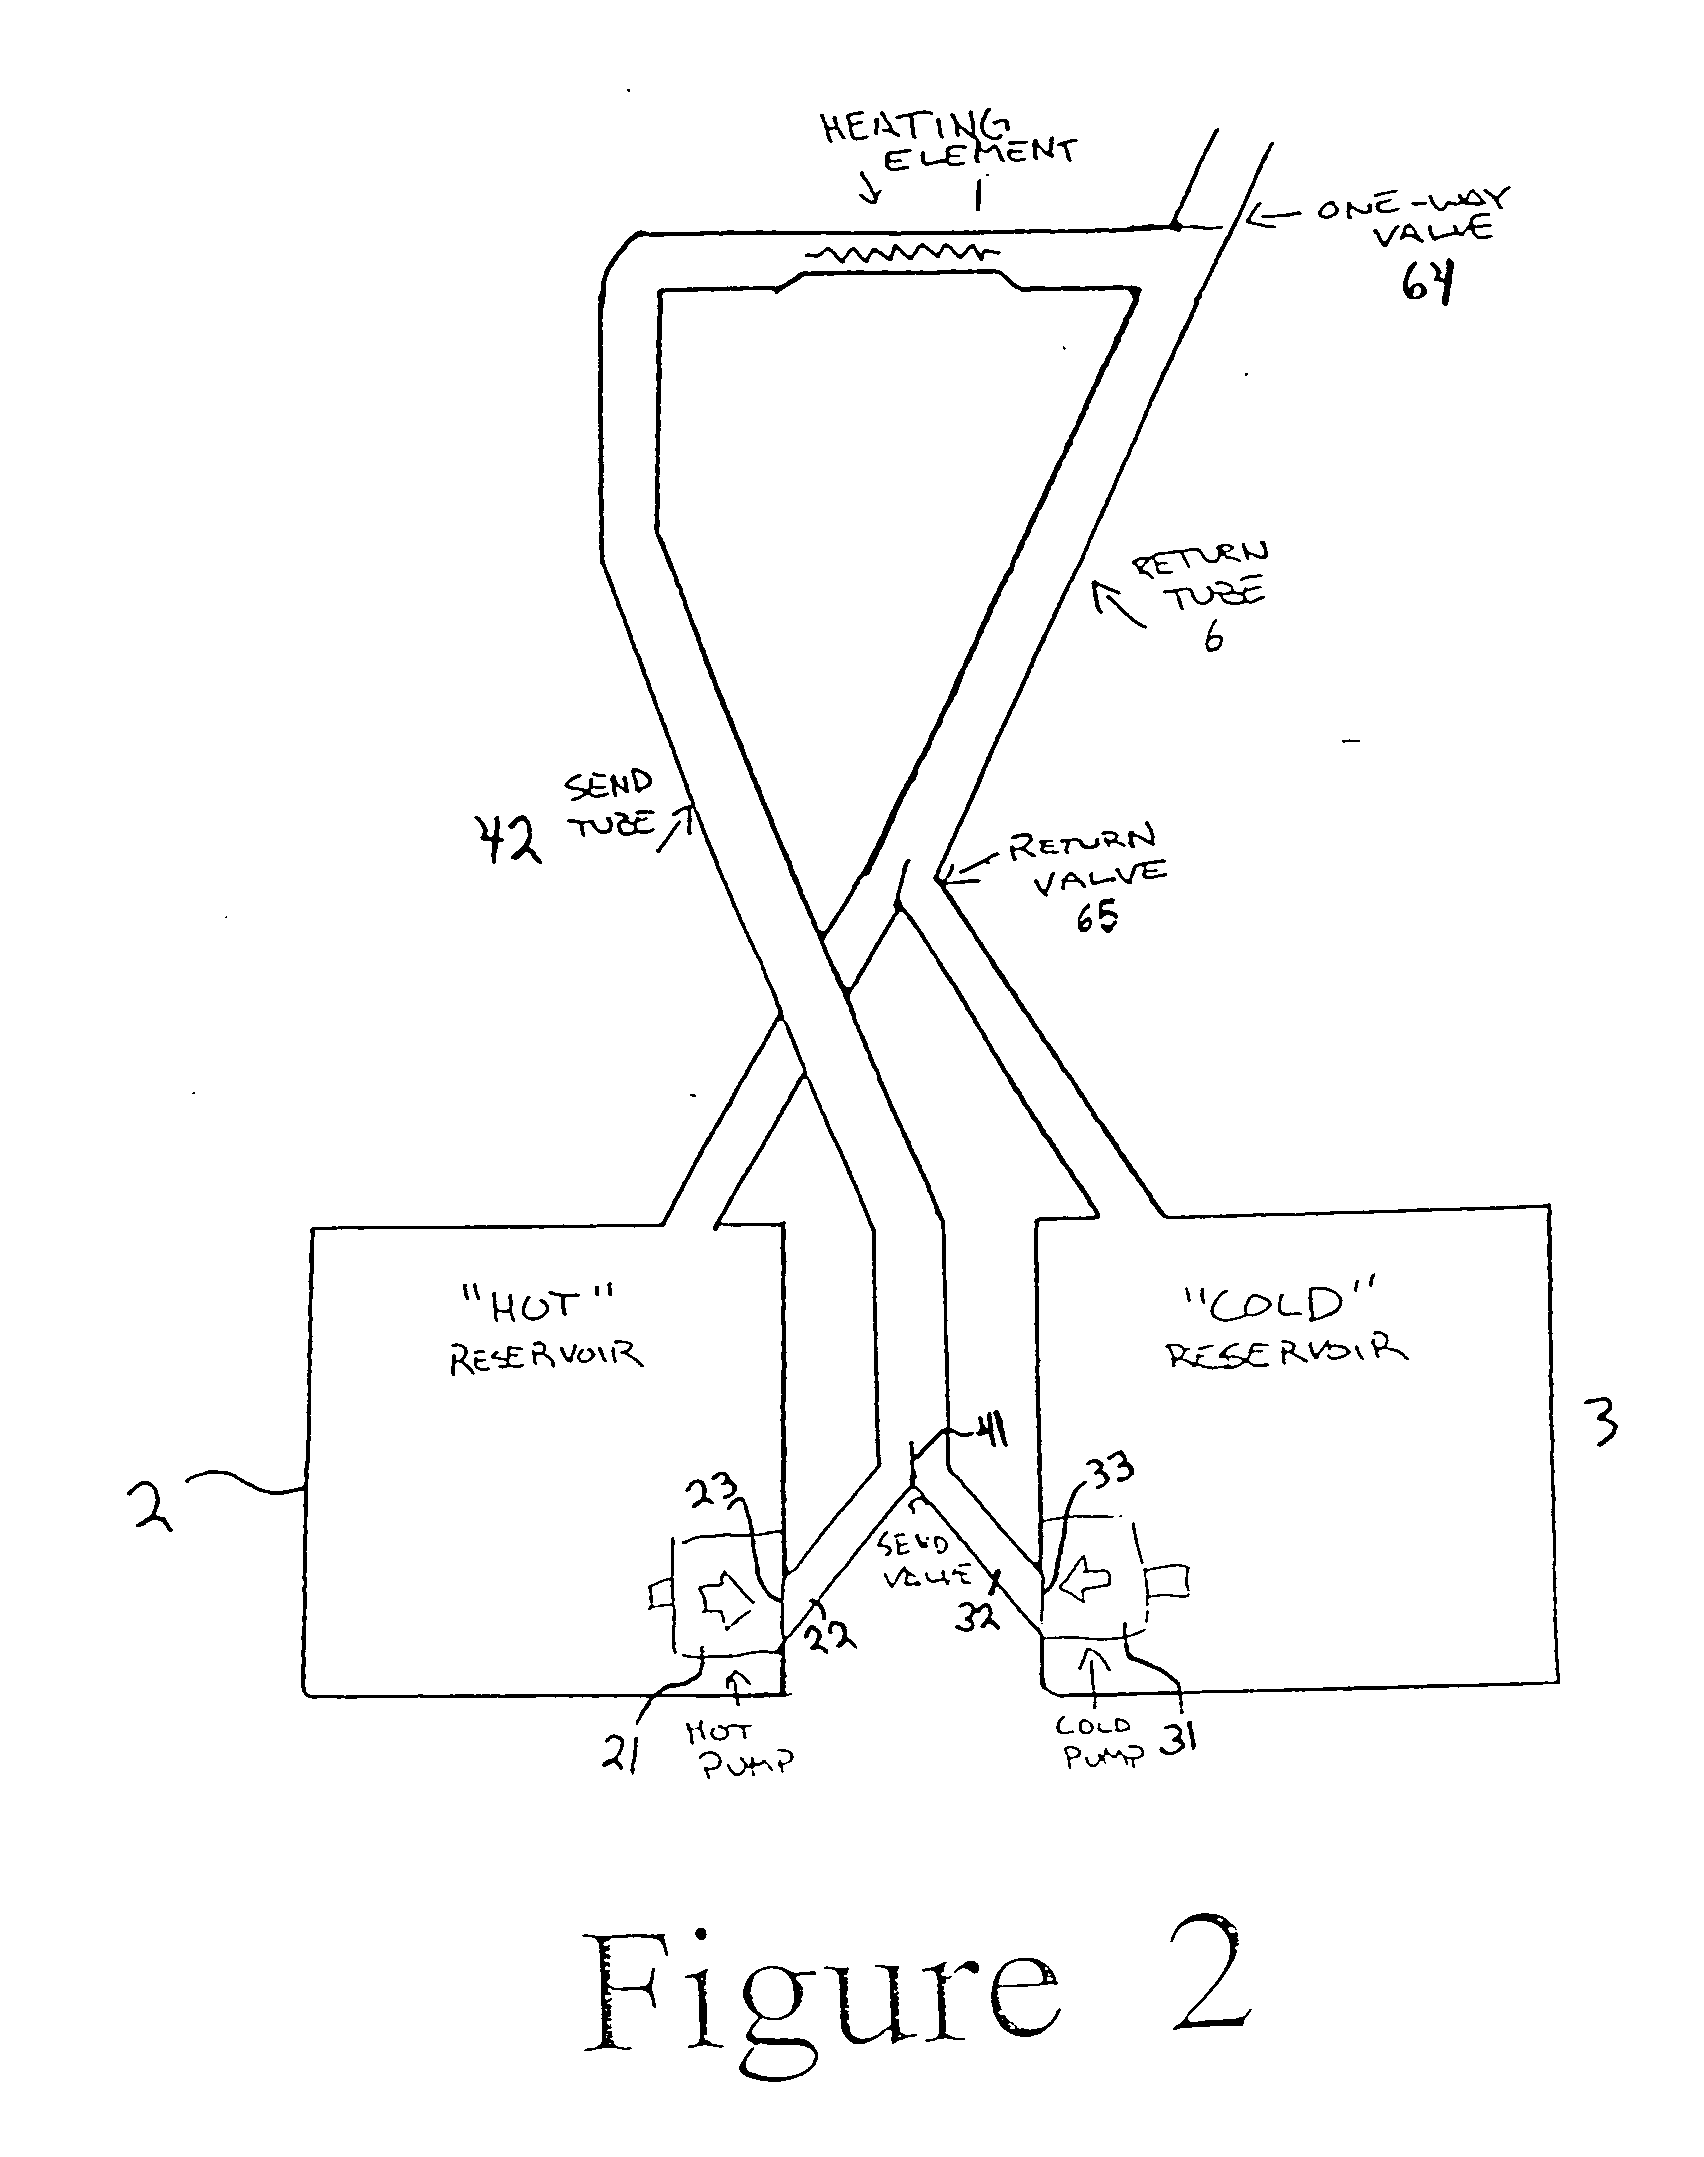 Moderating device for an electric stove heating element